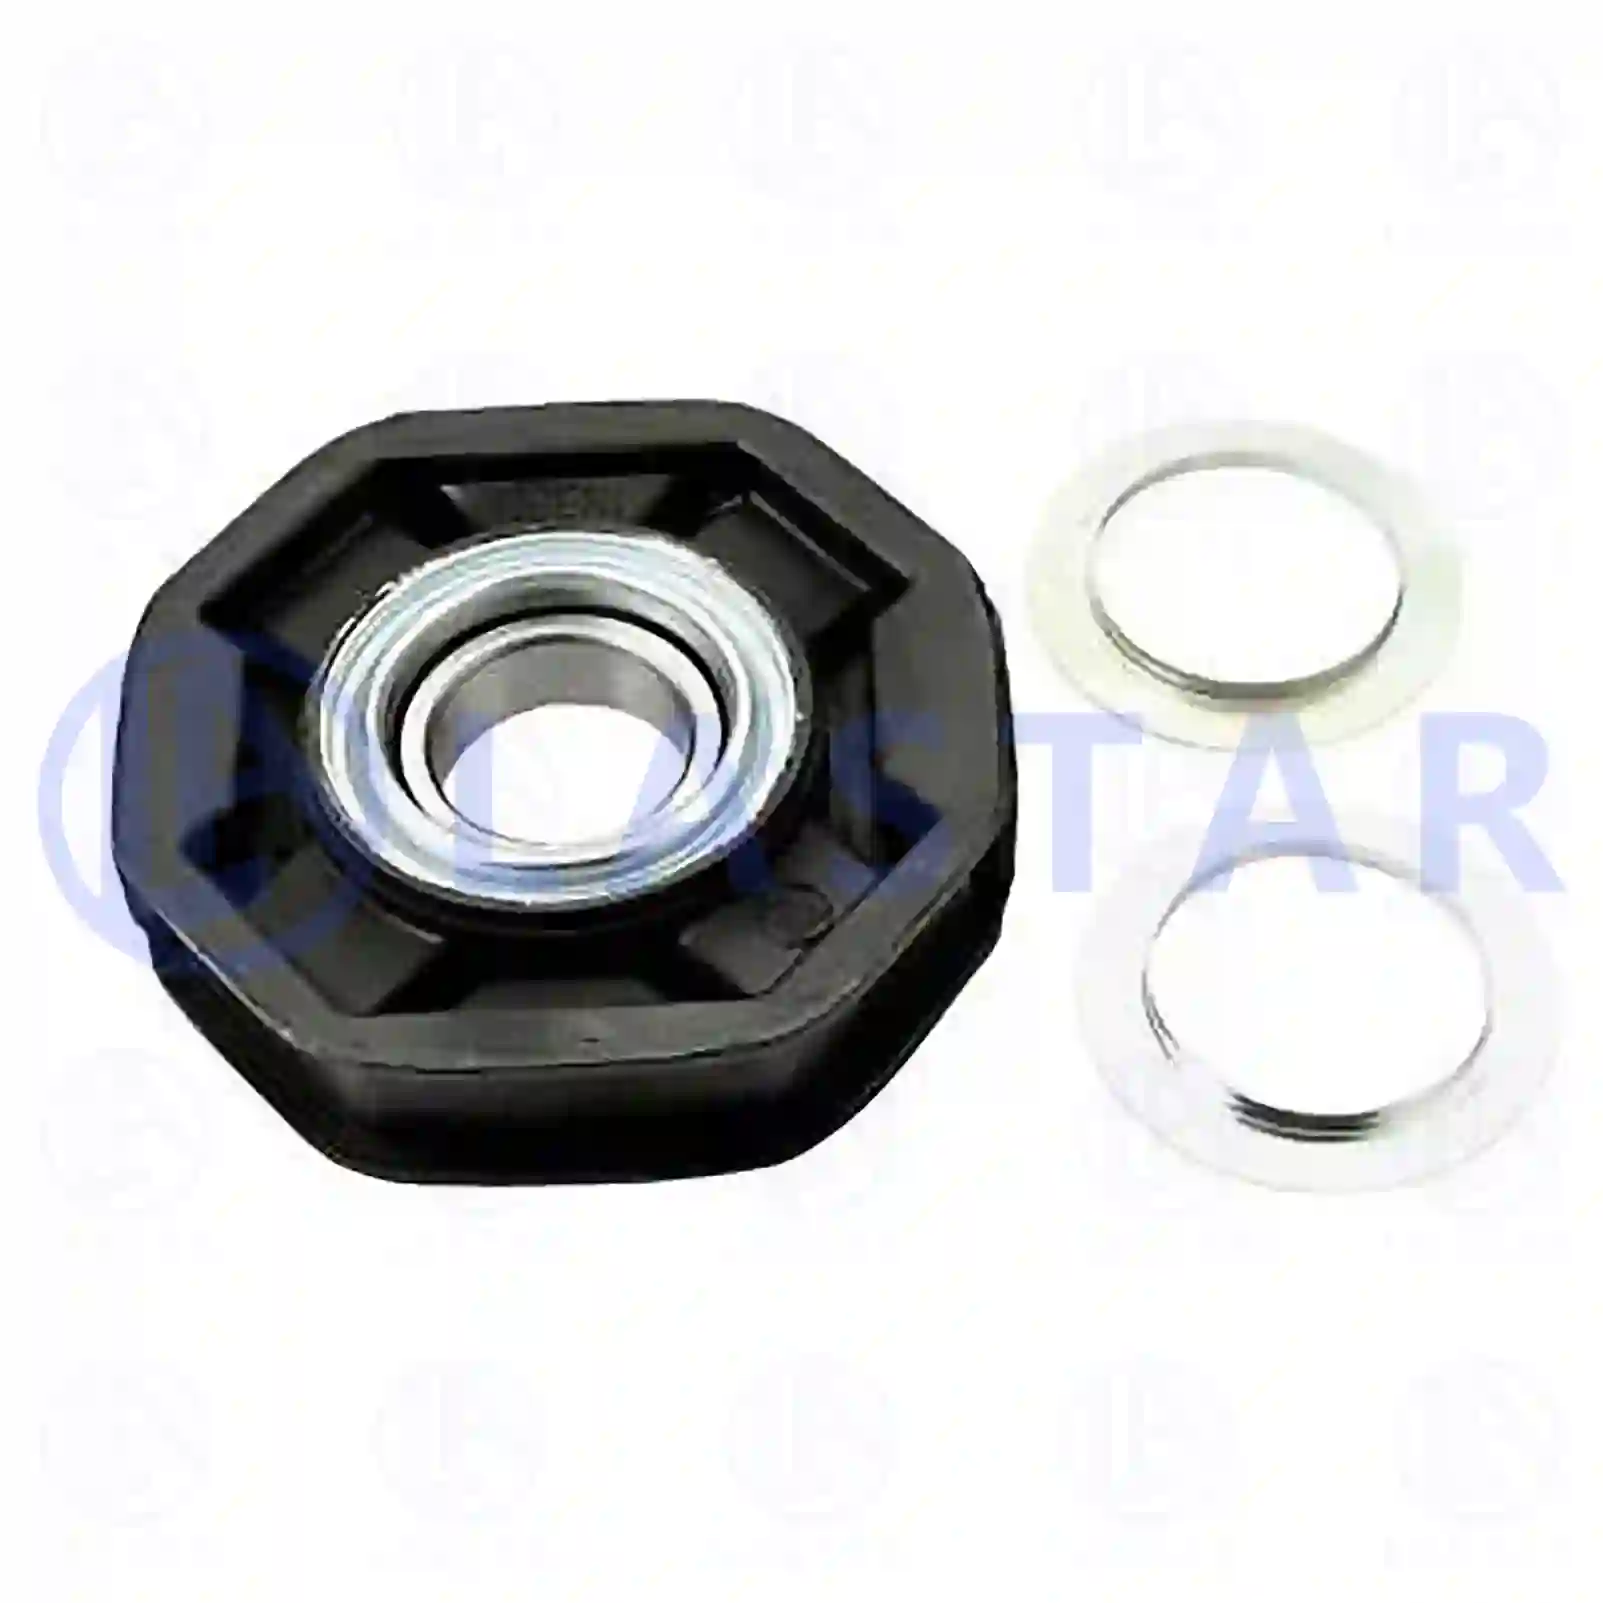 Support Bearing Center bearing, la no: 77734253 ,  oem no:3854100110, 3854100122, 3854100222, 3854100922, 3854101722, 3855860141 Lastar Spare Part | Truck Spare Parts, Auotomotive Spare Parts